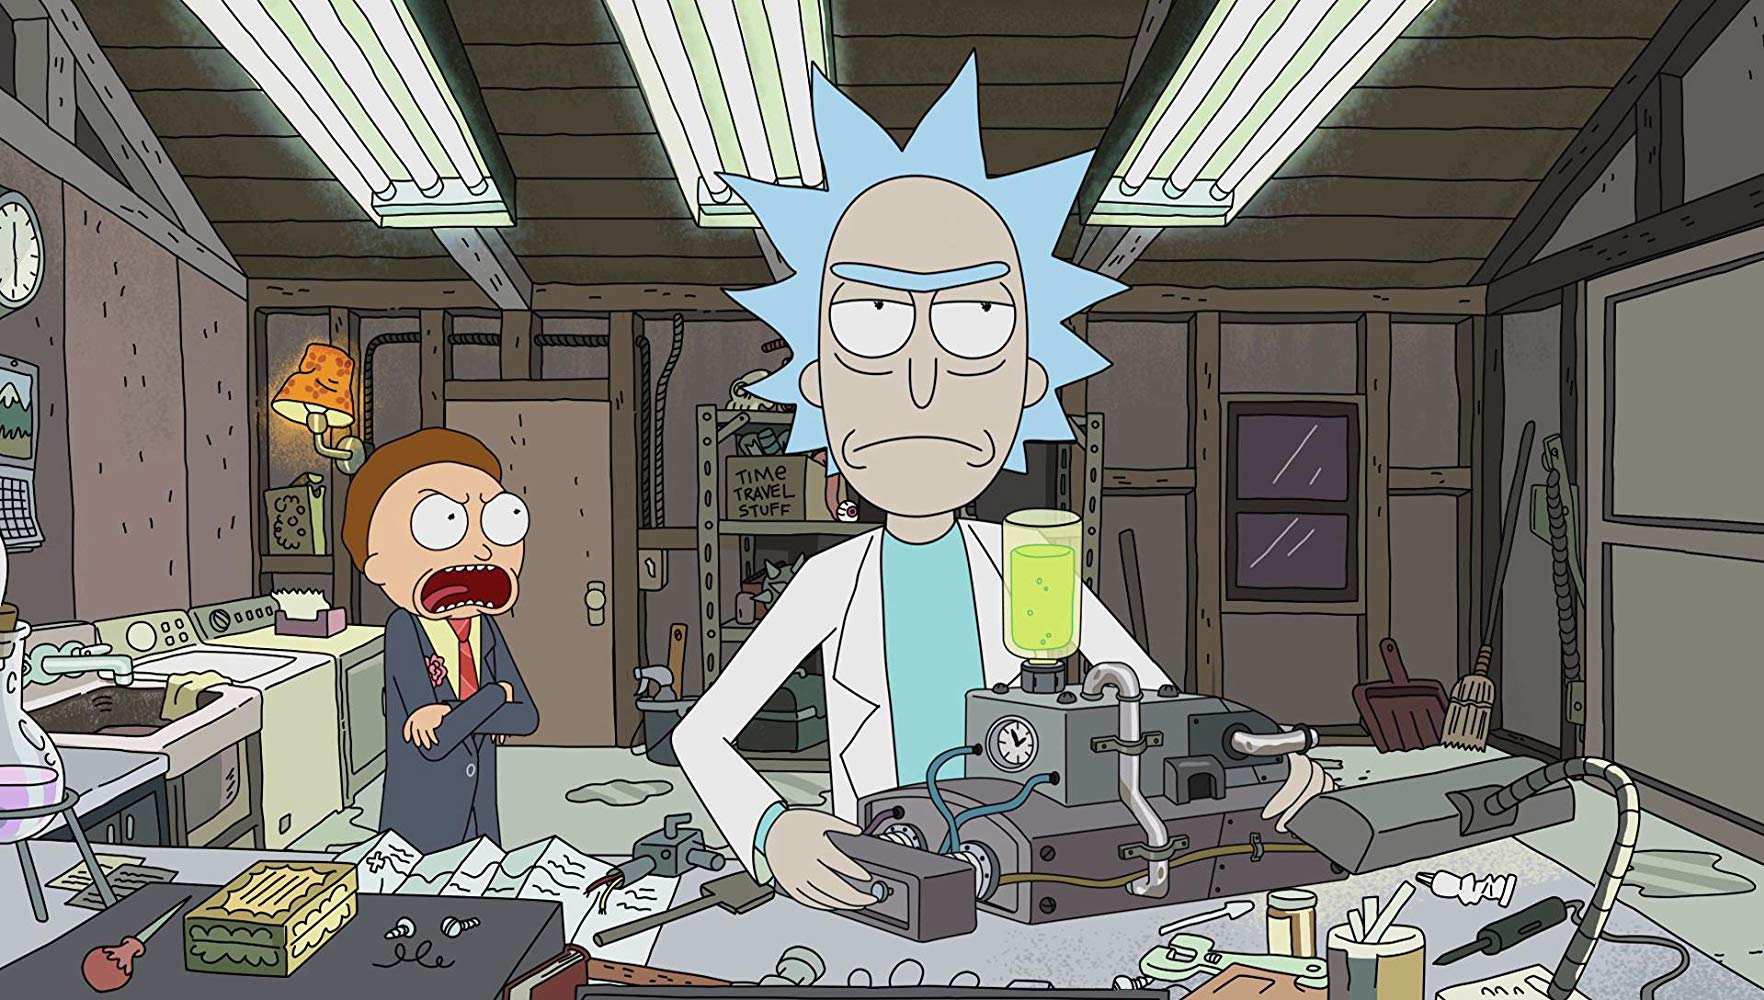 rick and morty season 3 episode 1.torrent